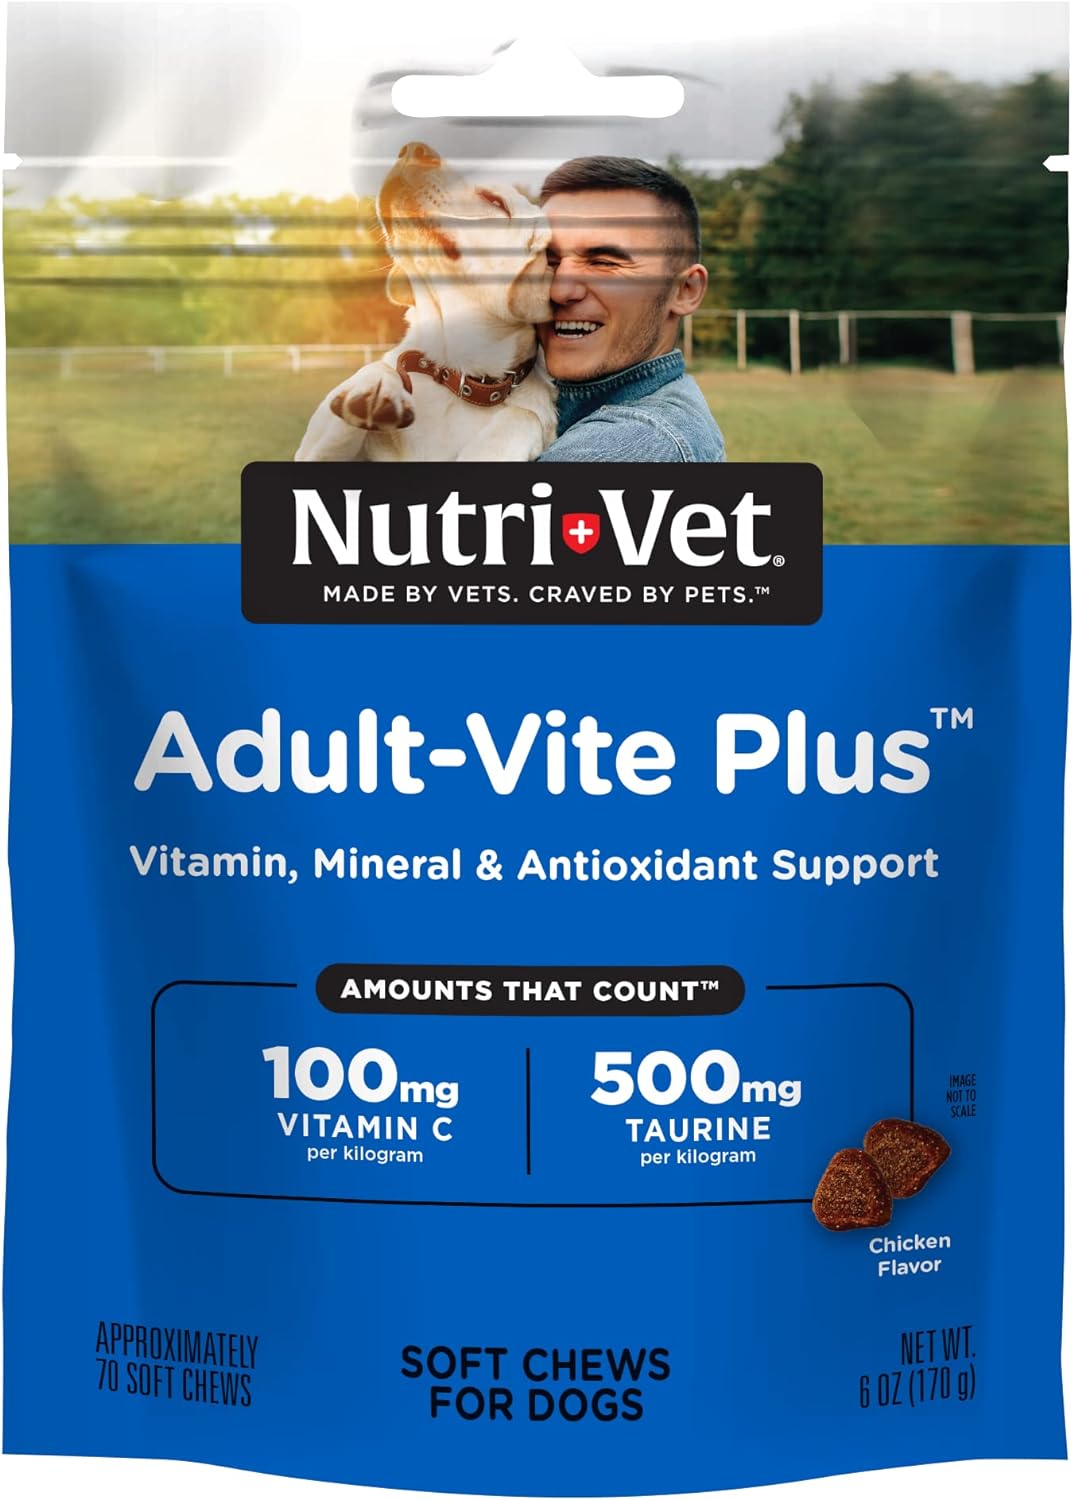 Nutri-Vet Adult-Vite Plus Soft Chews for Dogs |Formulated with Vitamins and Minerals | Supports Everyday Health | 70 Count, 6 Ounces